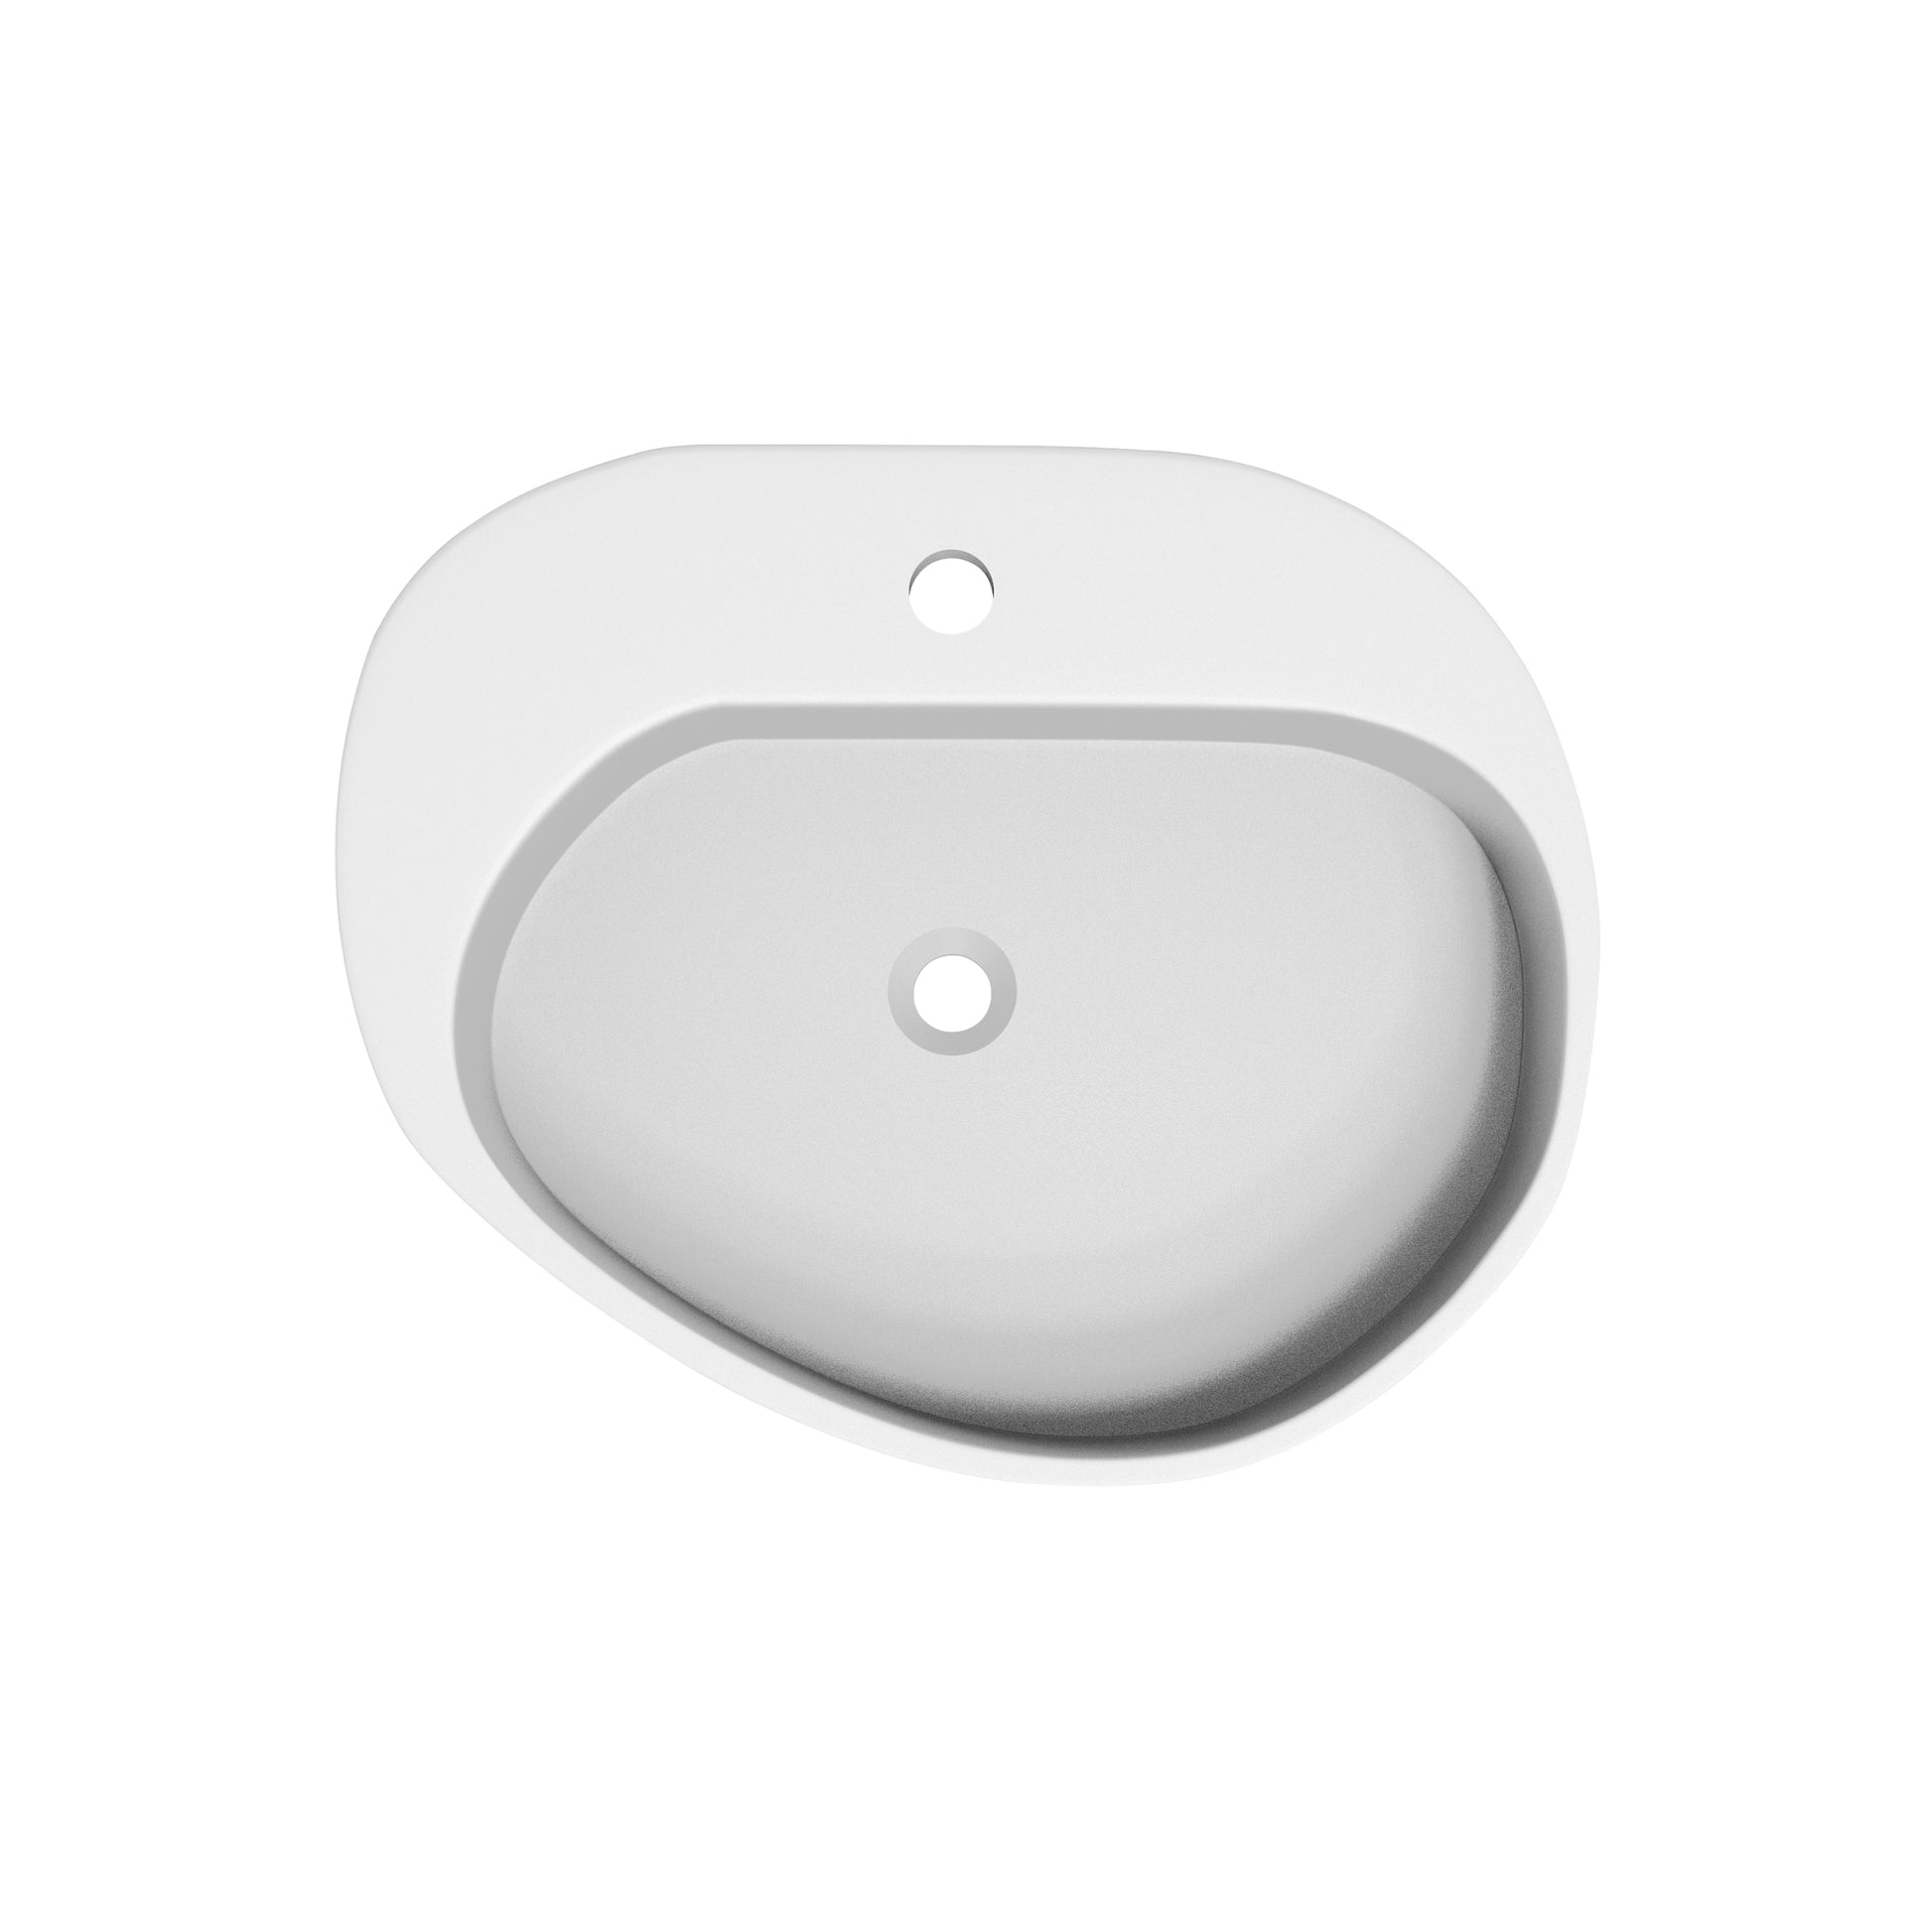 Fs154A 580 Solid Surface Basin With Chrome Drain